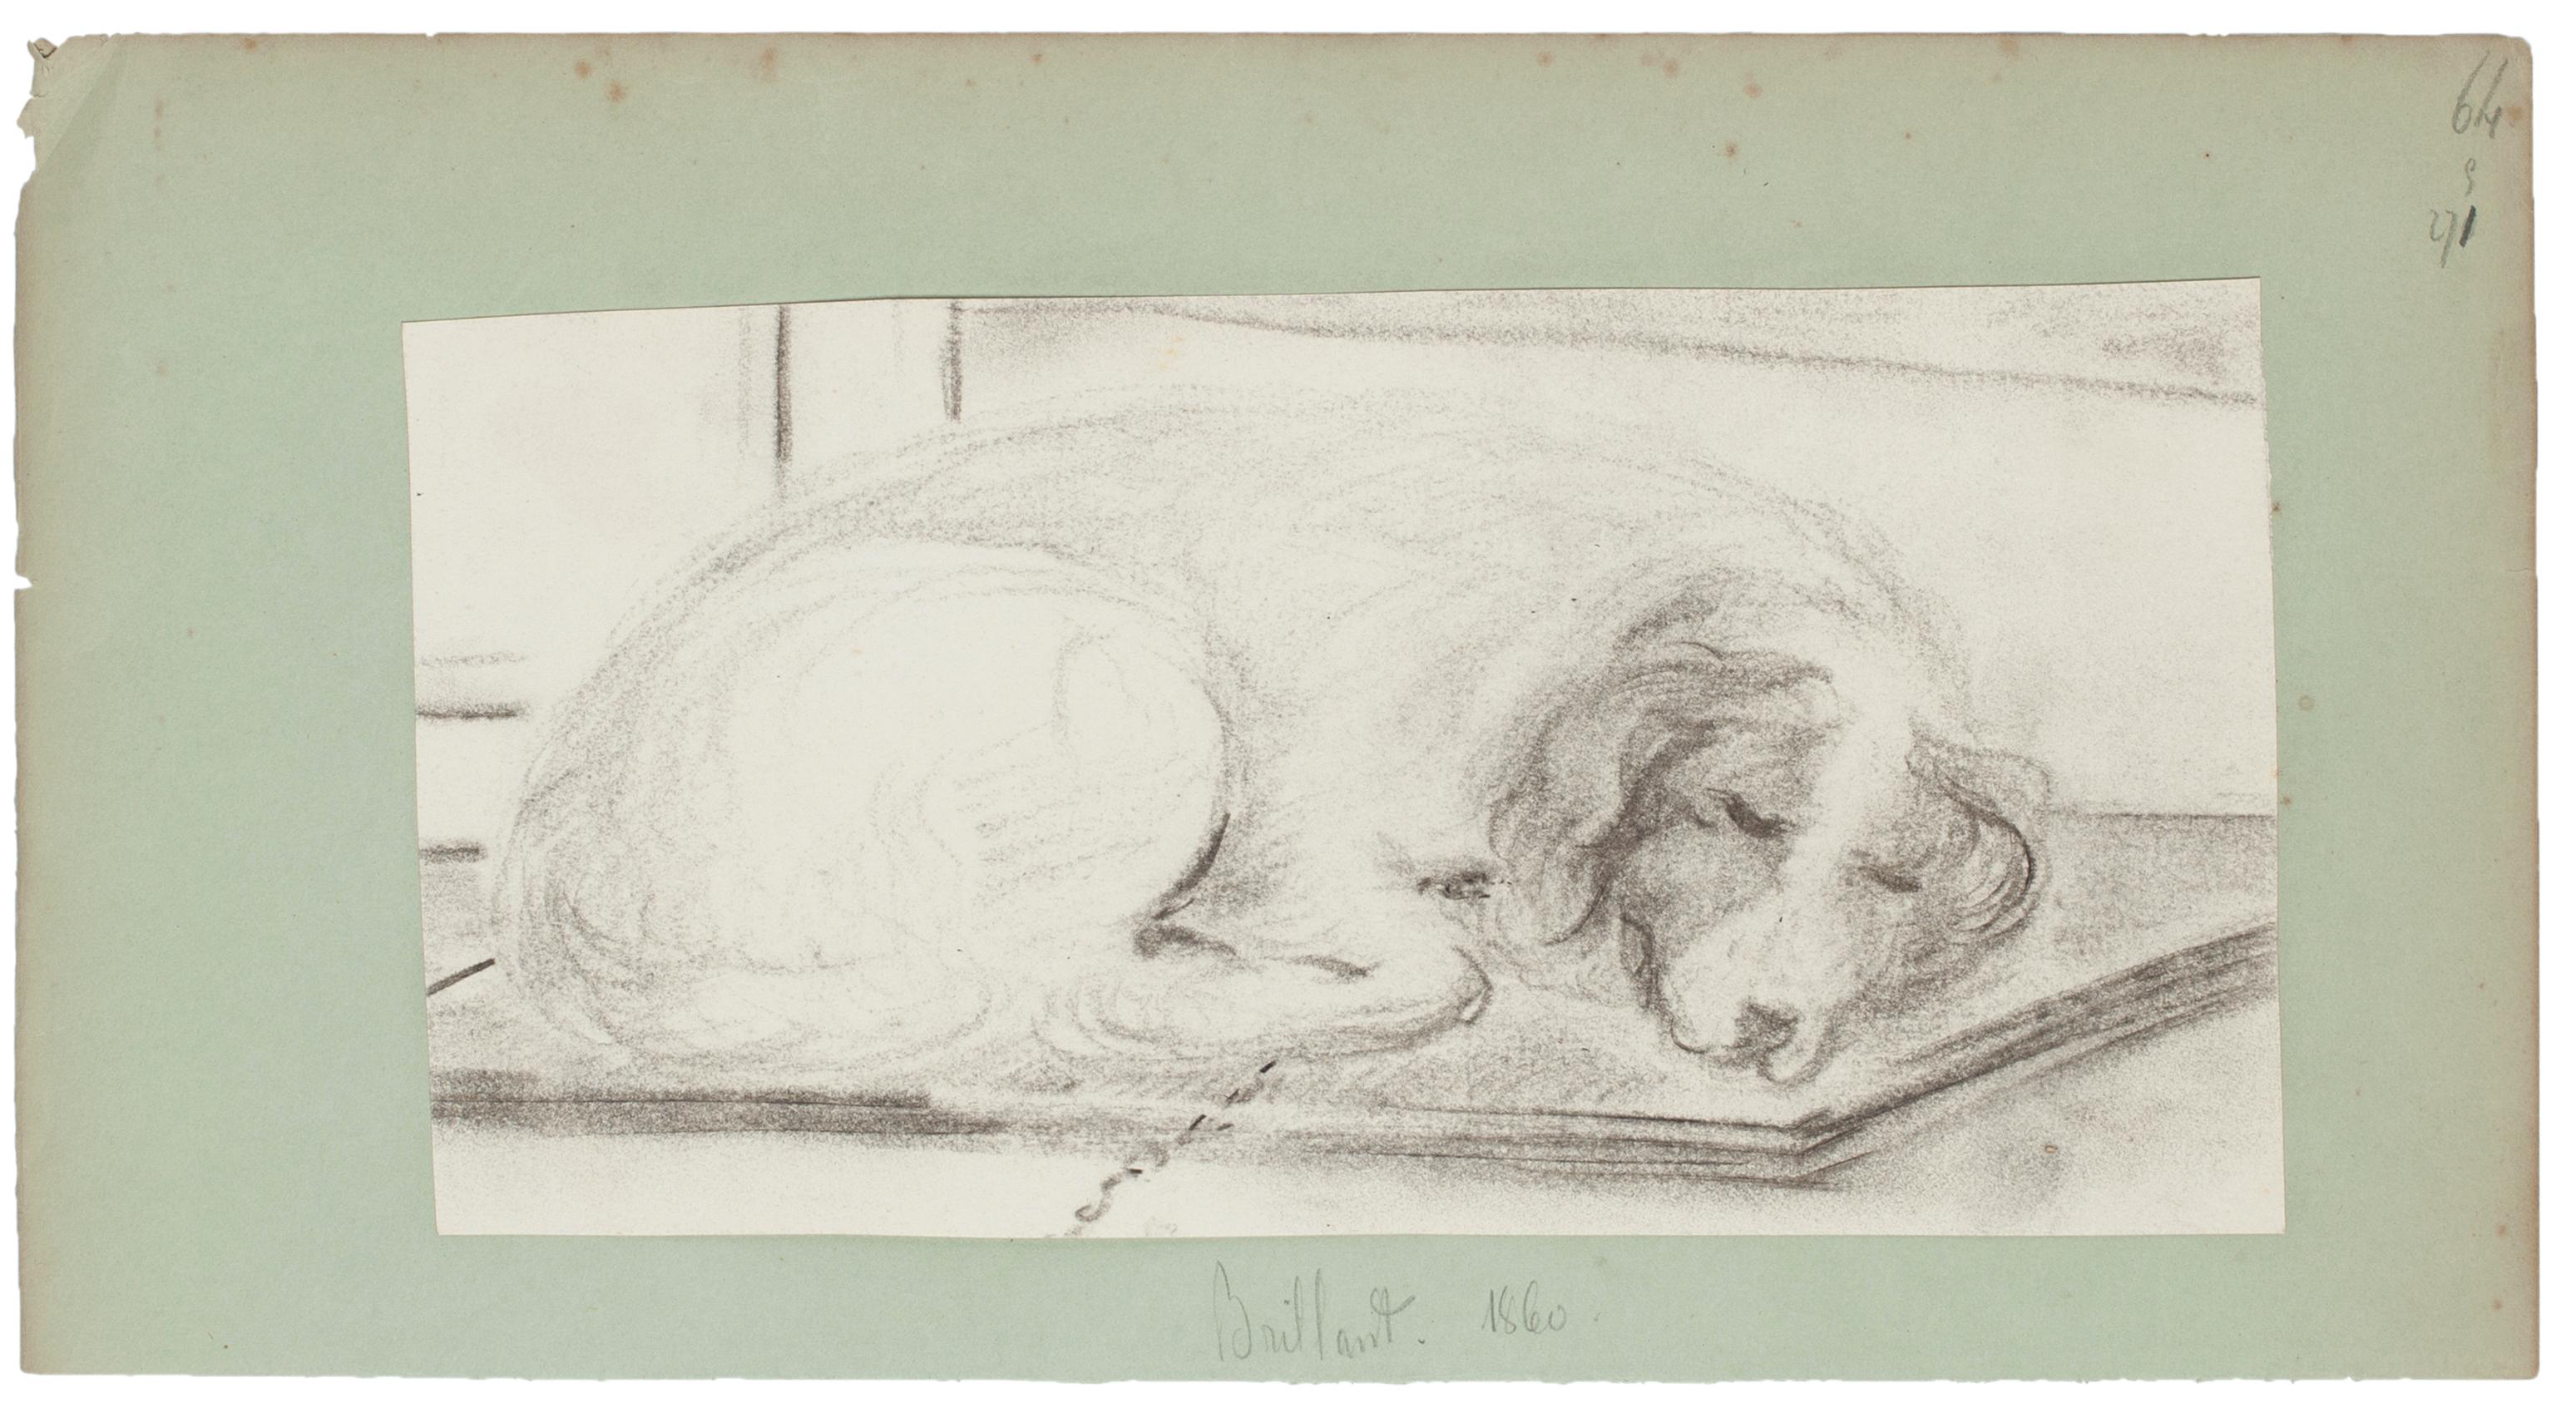 Unknown Figurative Art - Sleeping Dog - Pencil Drawing on Paper - Late 19th Century